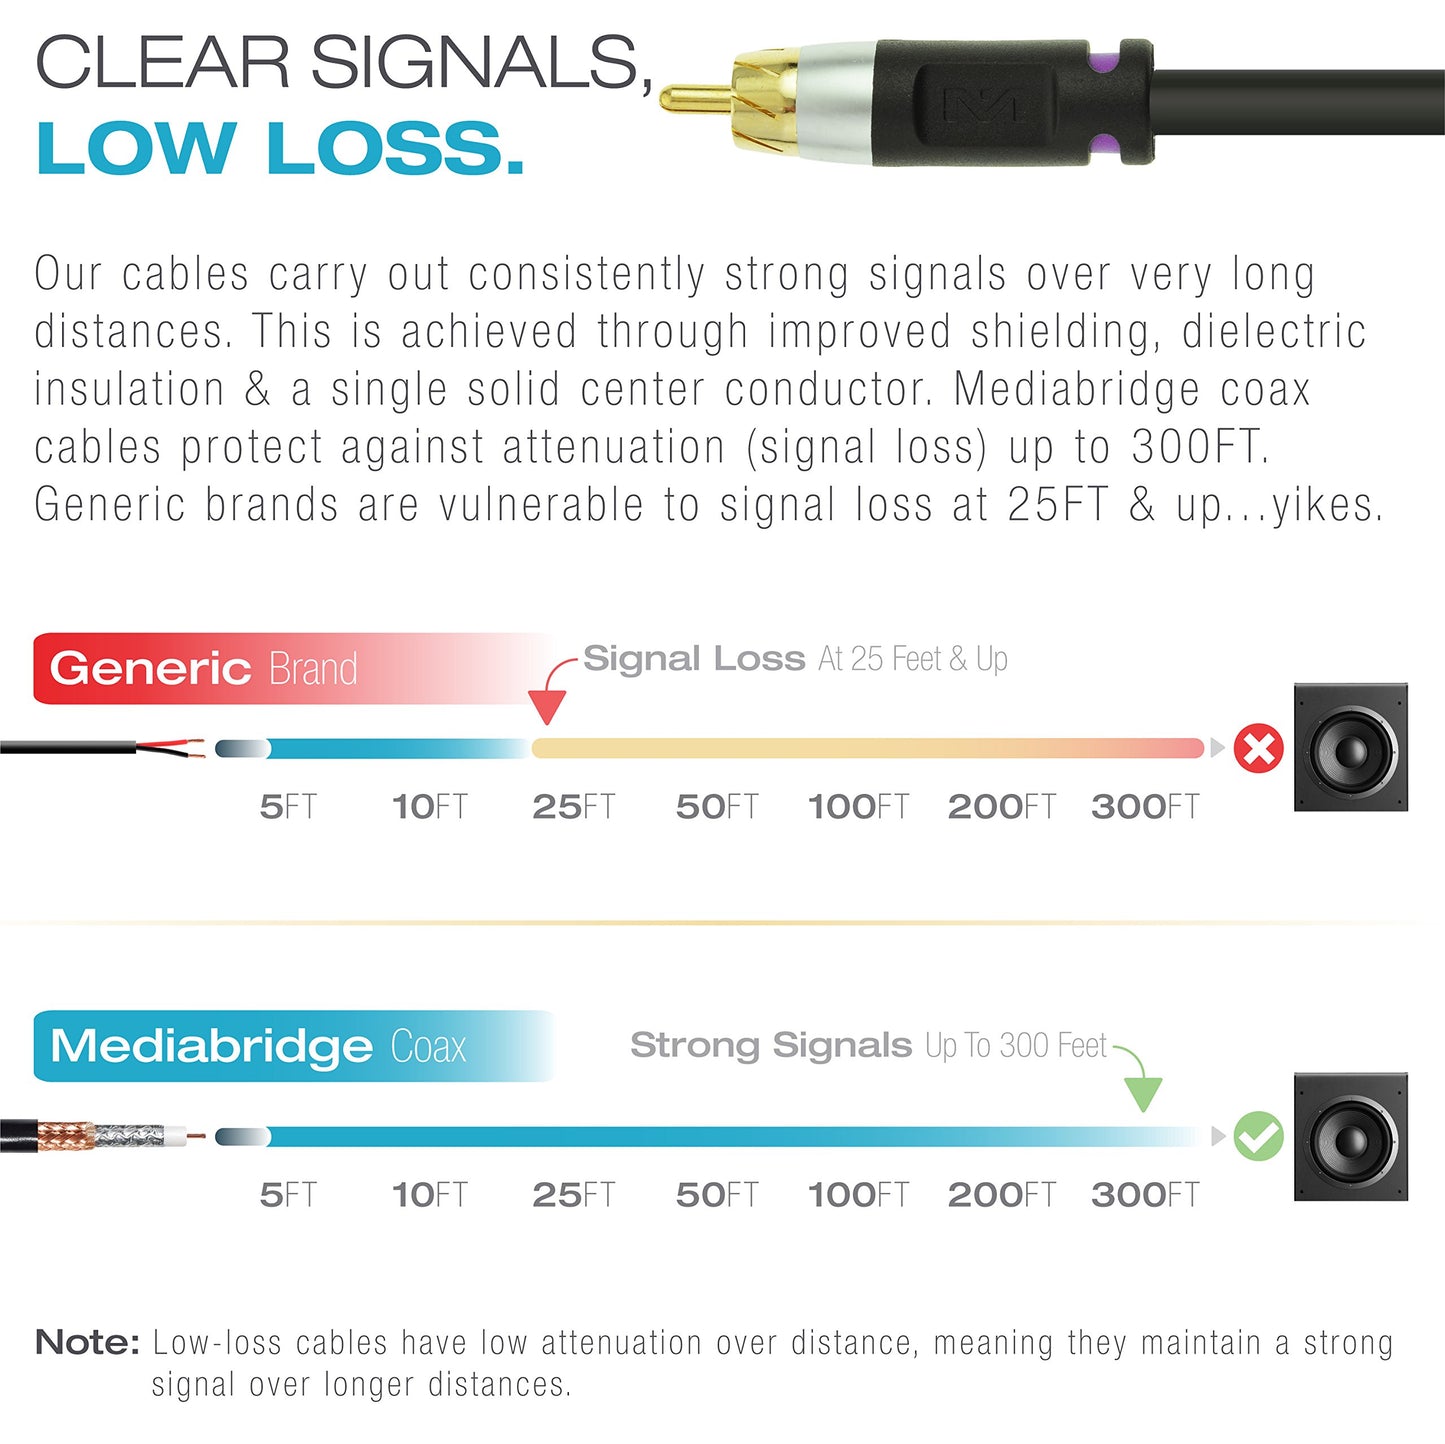 Mediabridge ULTRA Series Subwoofer Cable (15 Feet) - Dual Shielded with Gold Plated RCA to RCA Connectors - Black